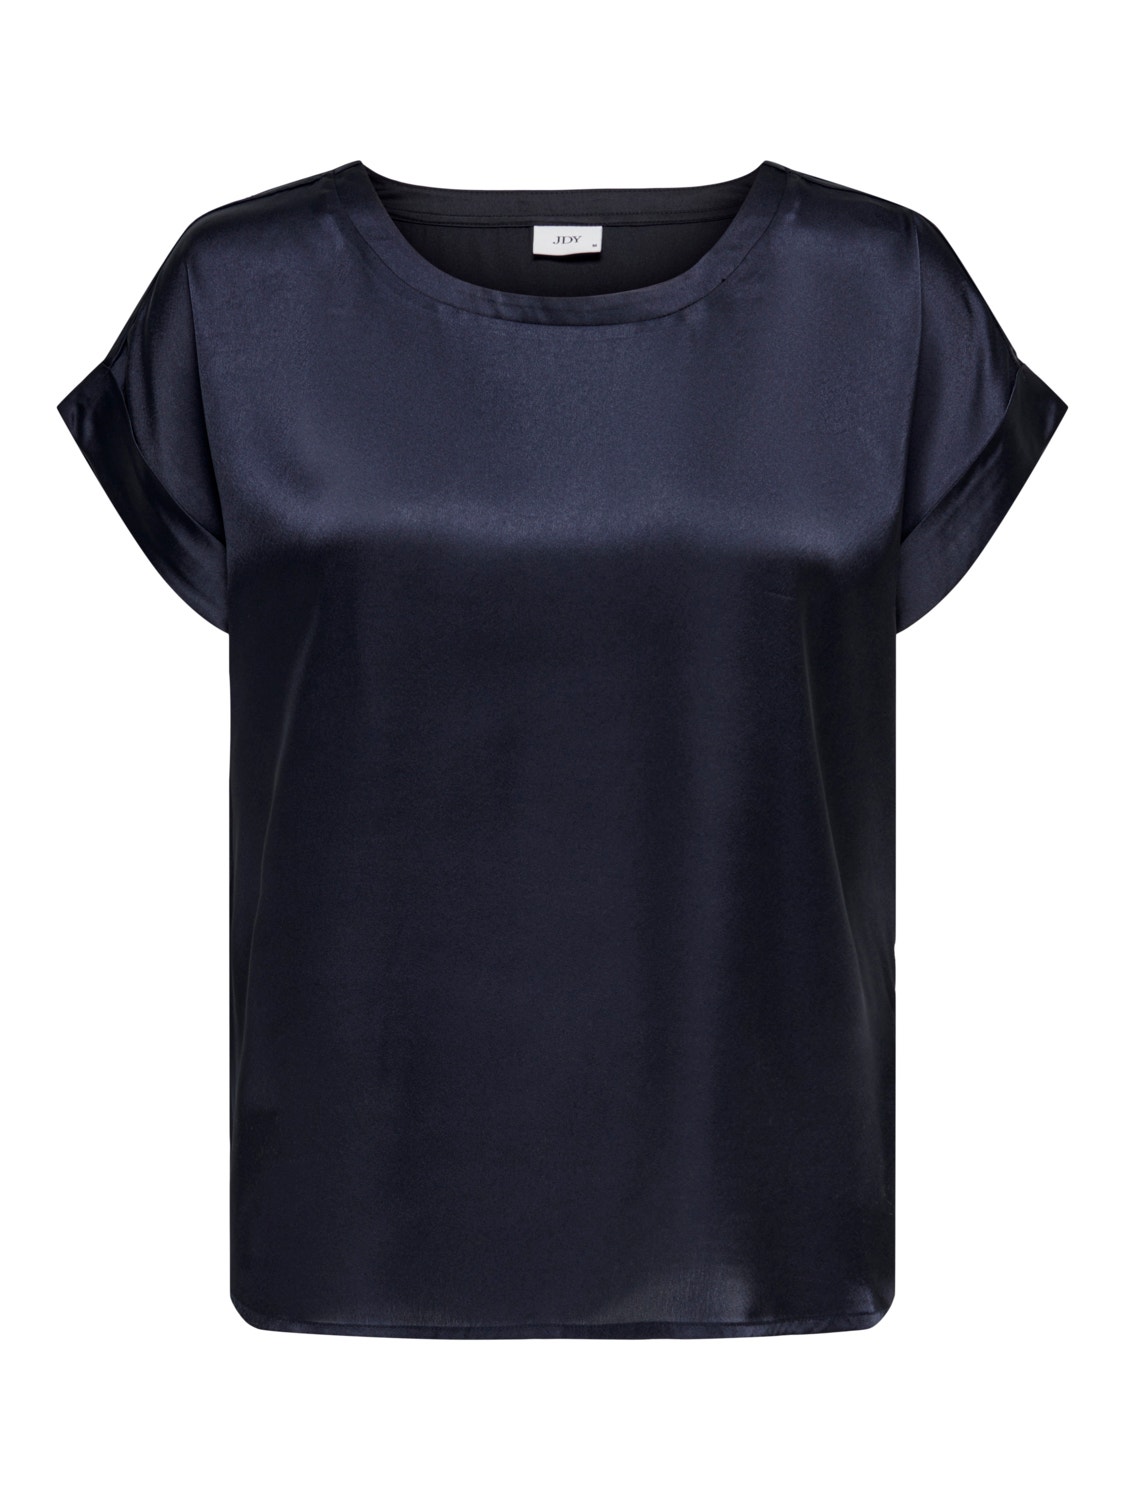 ONLY o-neck top -Night Sky - 15304077